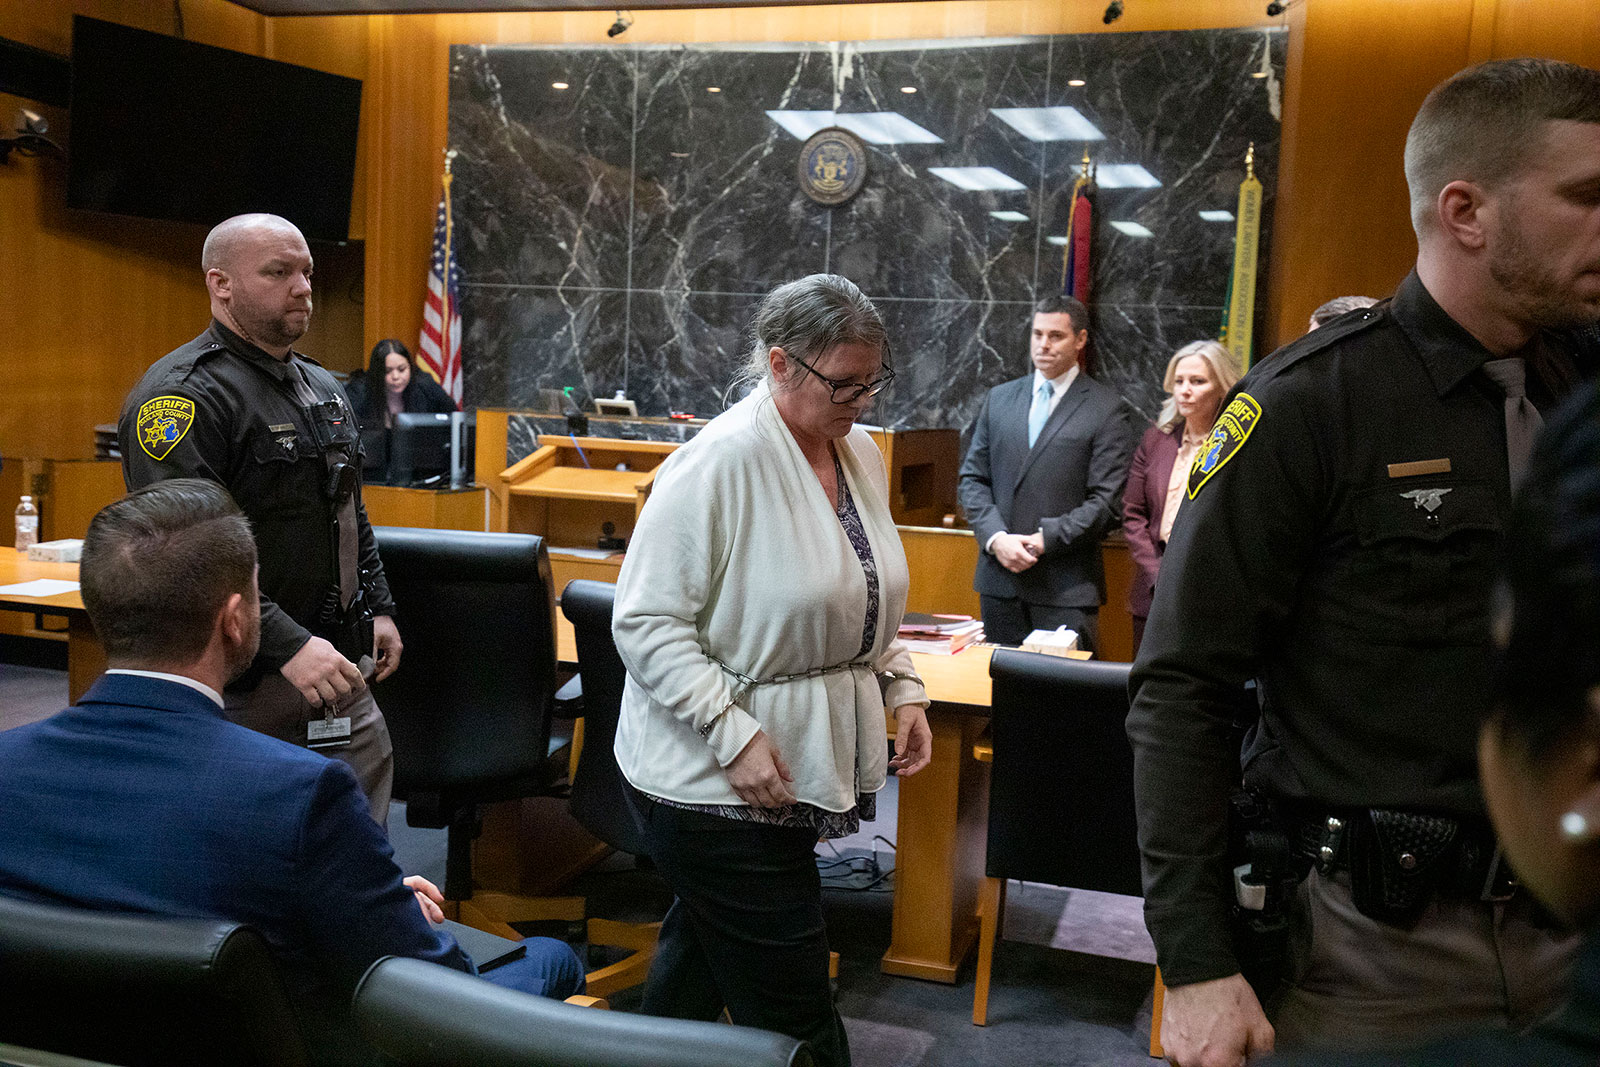 Jennifer Crumbley exits from the courtroom in Oakland County Circuit Court after the jury found her guilty on four counts of involuntary manslaughter on Tuesday in Pontiac, Michigan. 